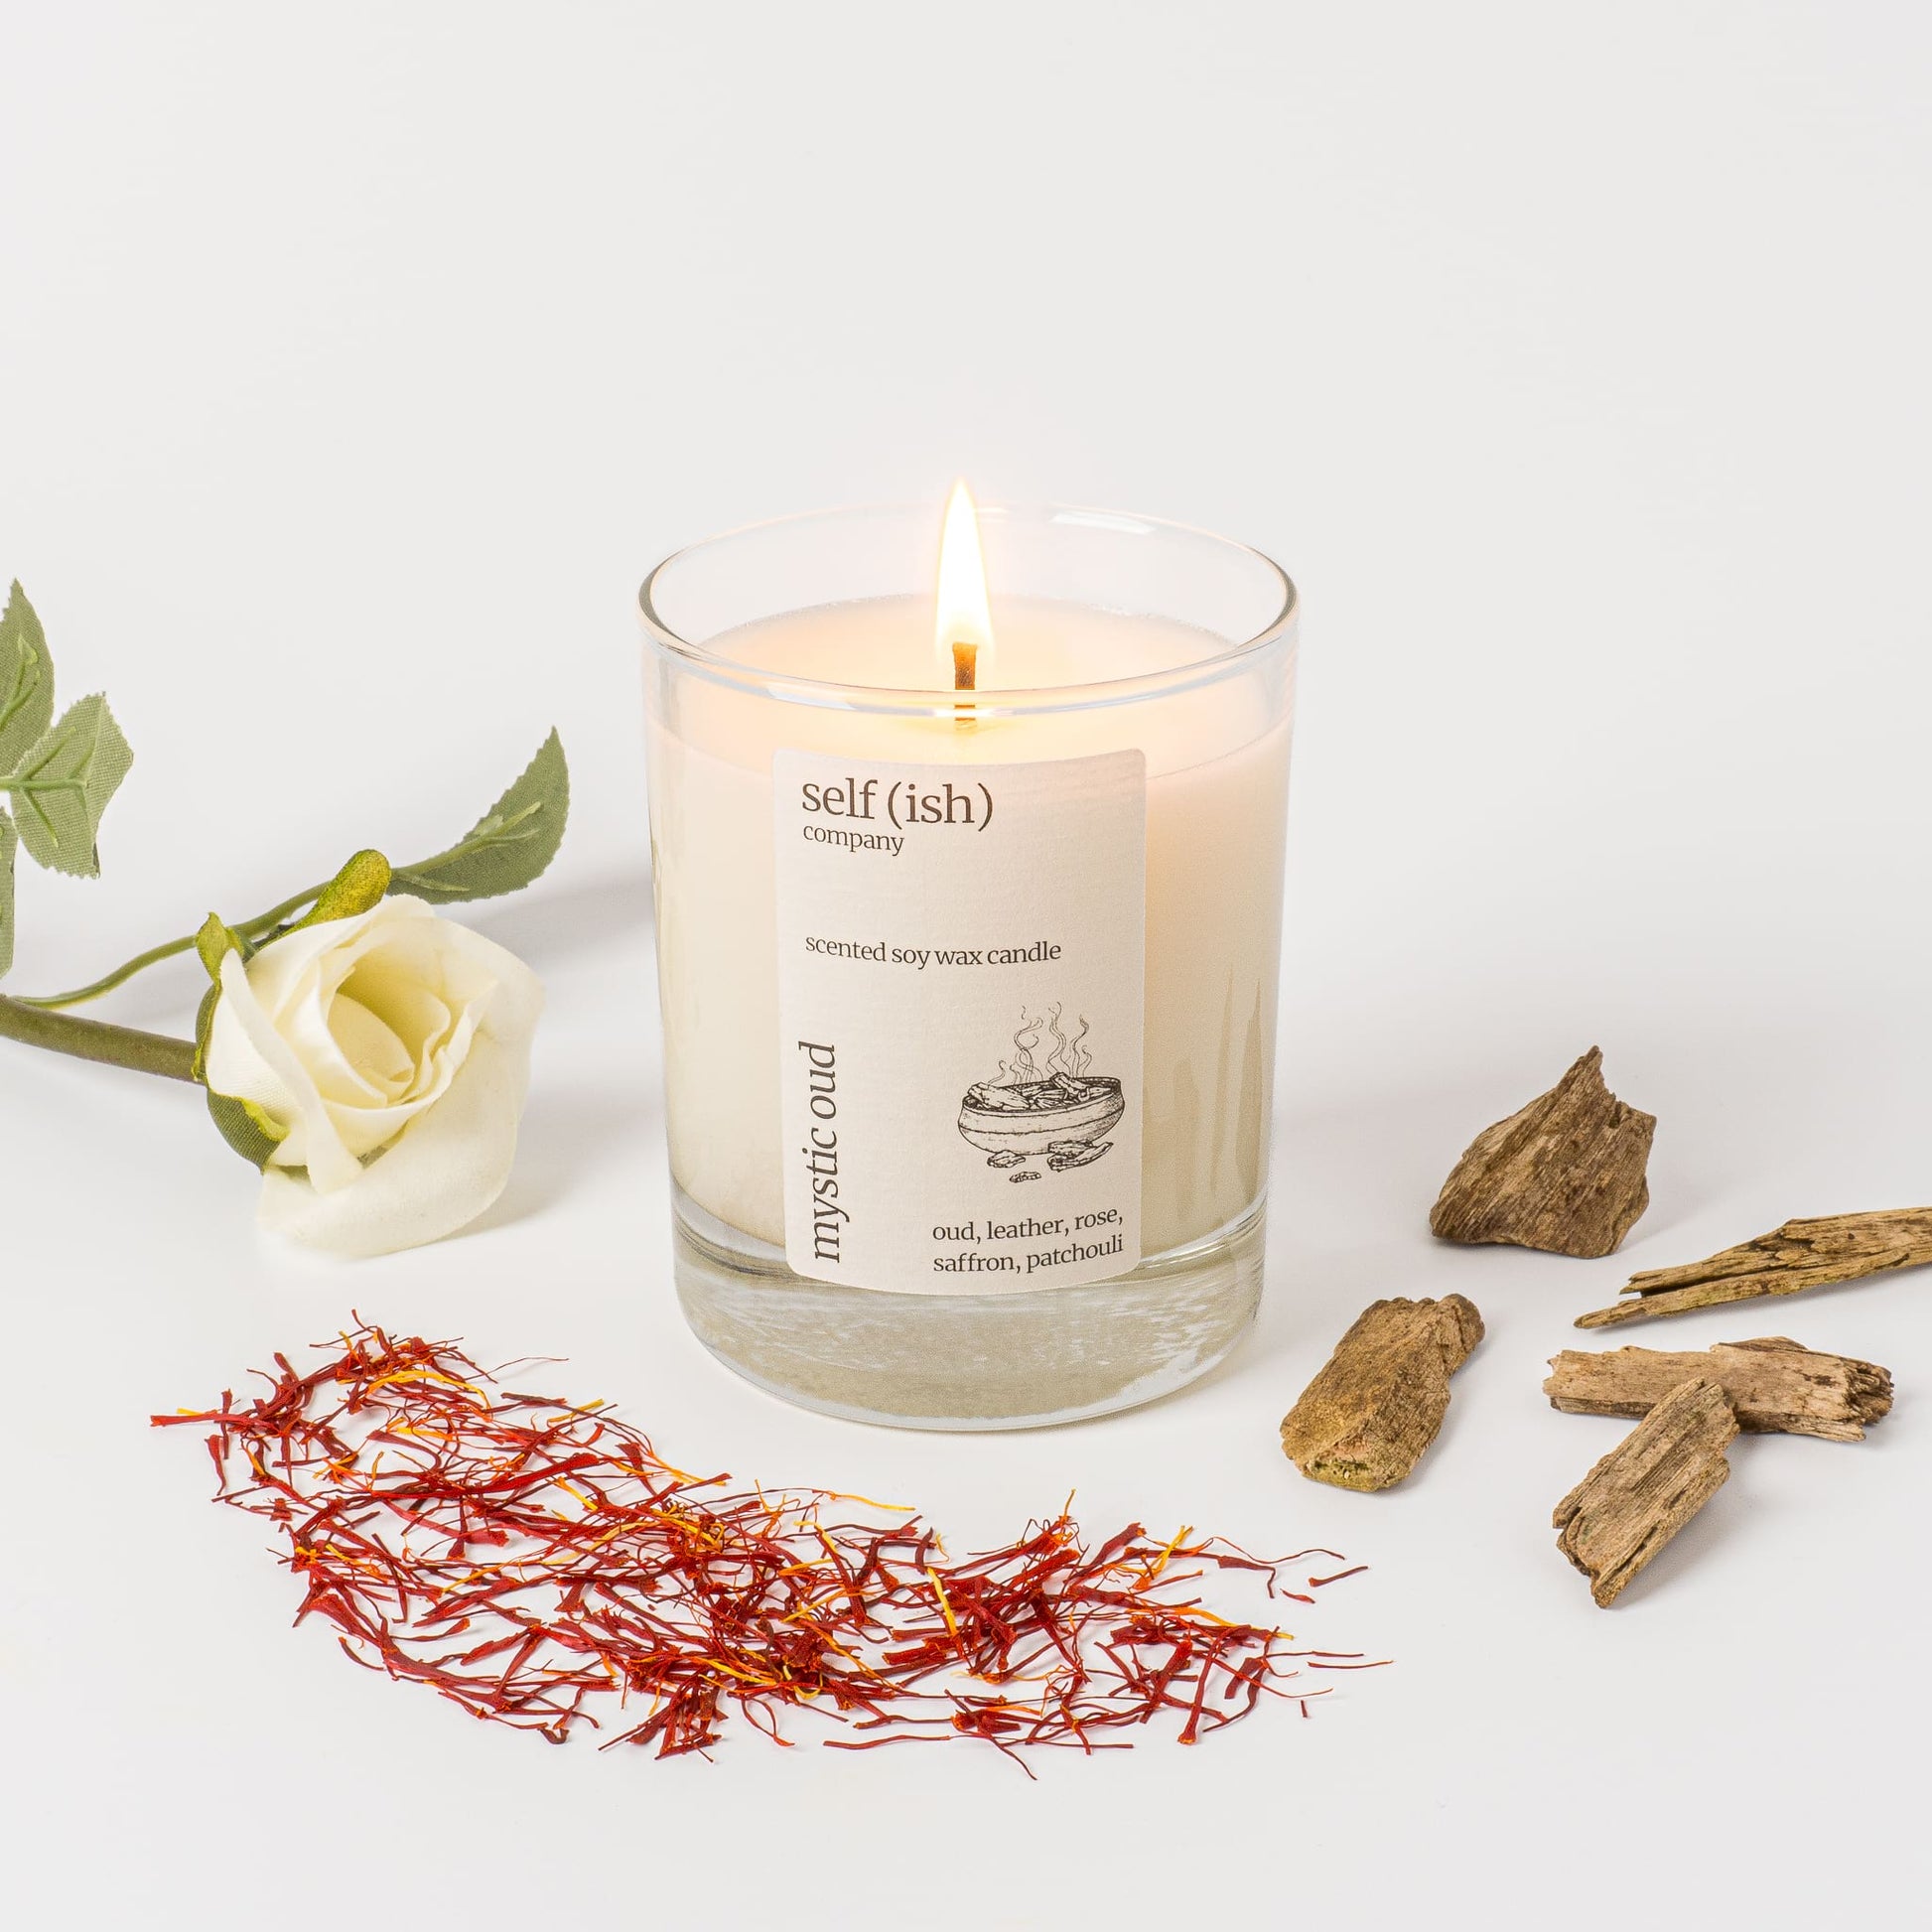 oud scented soy wax candle with a burning single wick and pretty label, eco-friendly candle for sale suitable for vegans, best candle to buy online in the UK, handcrafted candle